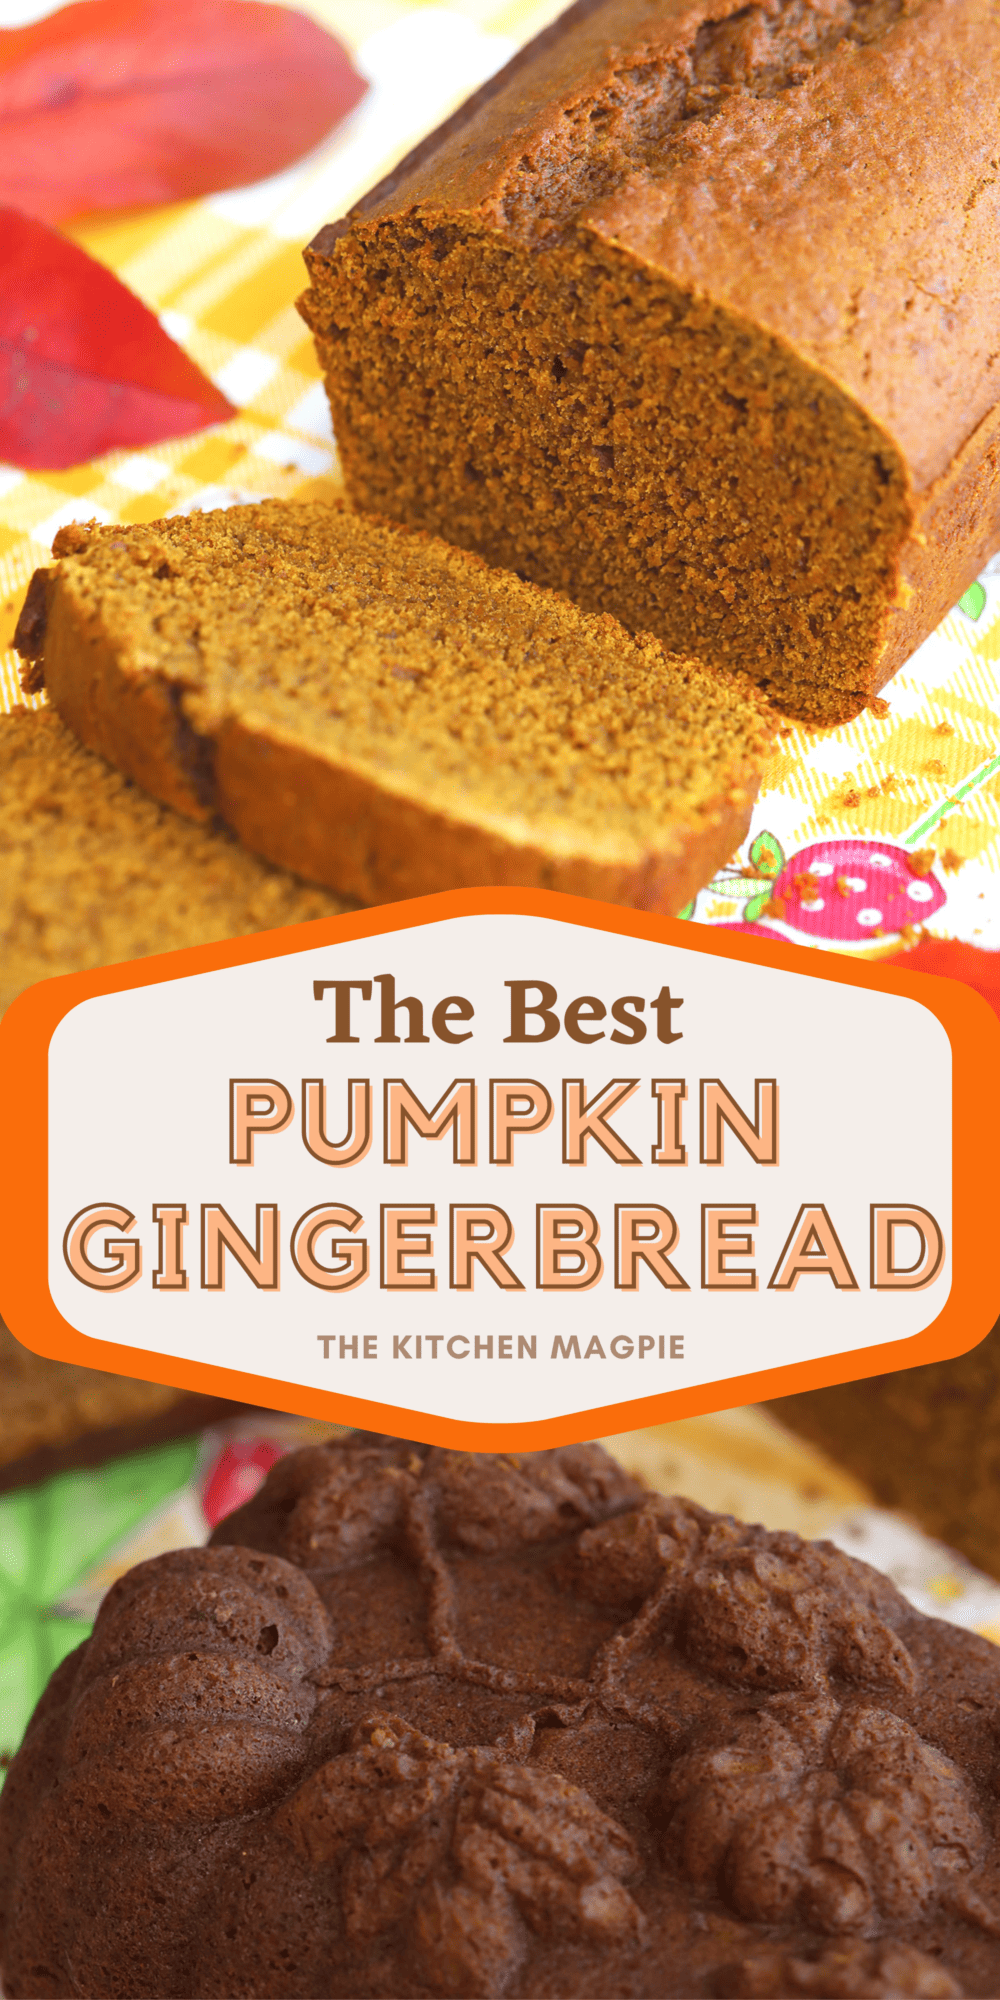 This pumpkin gingerbread recipe makes two loaves and is a fantastic way to enjoy the flavors of the season!